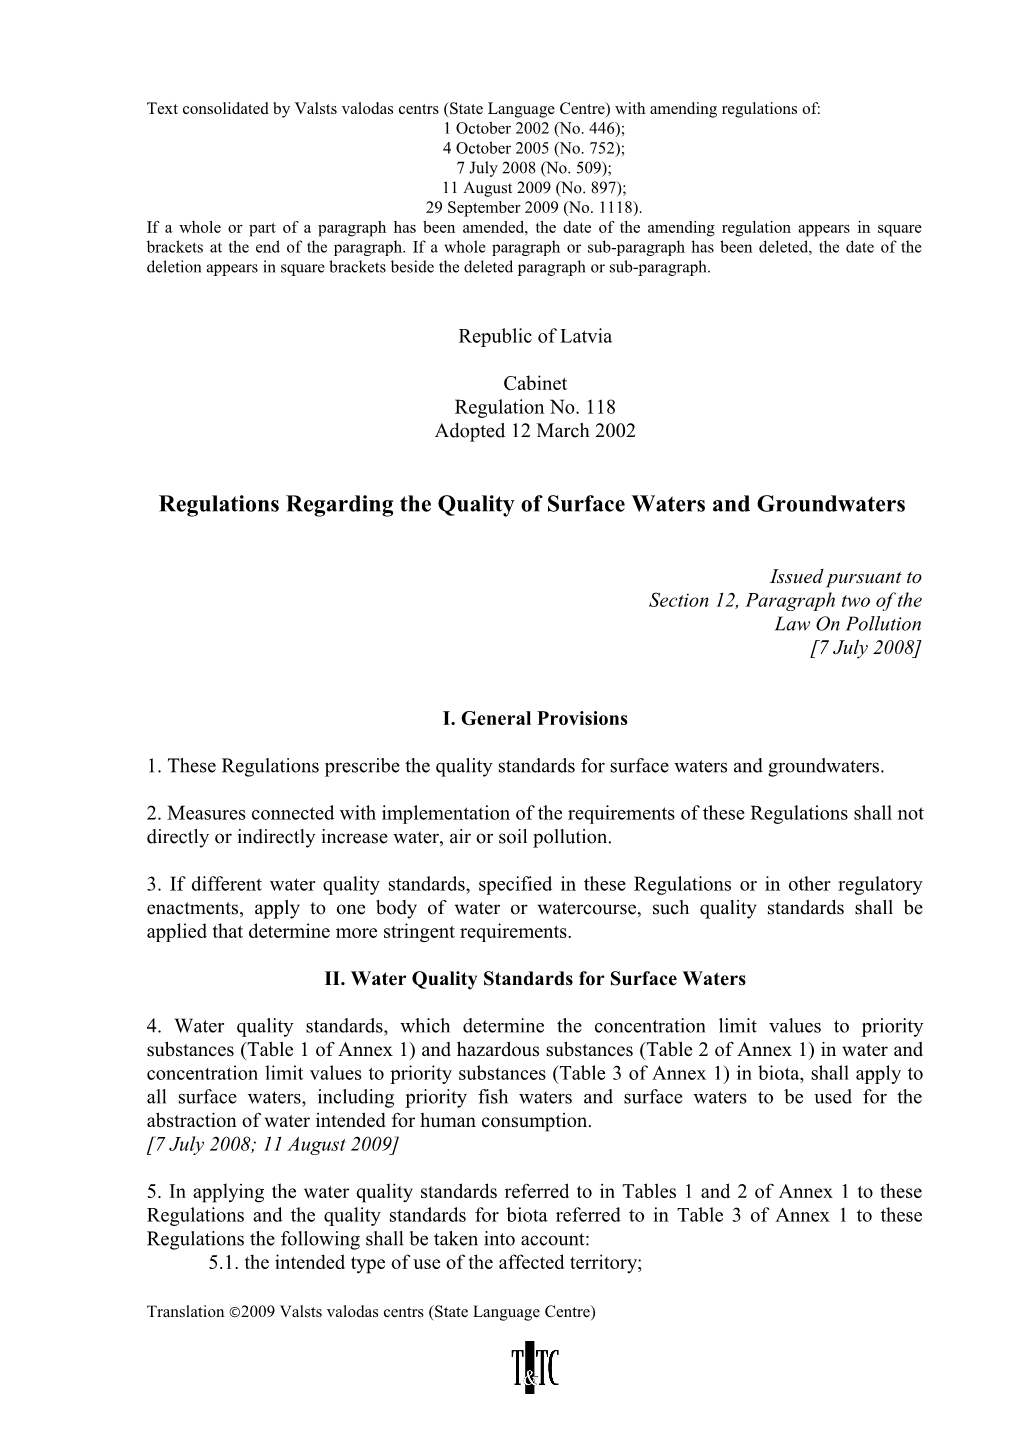 Text Consolidated by Valsts Valodas Centrs (State Language Centre) with Amending Regulations Of s4